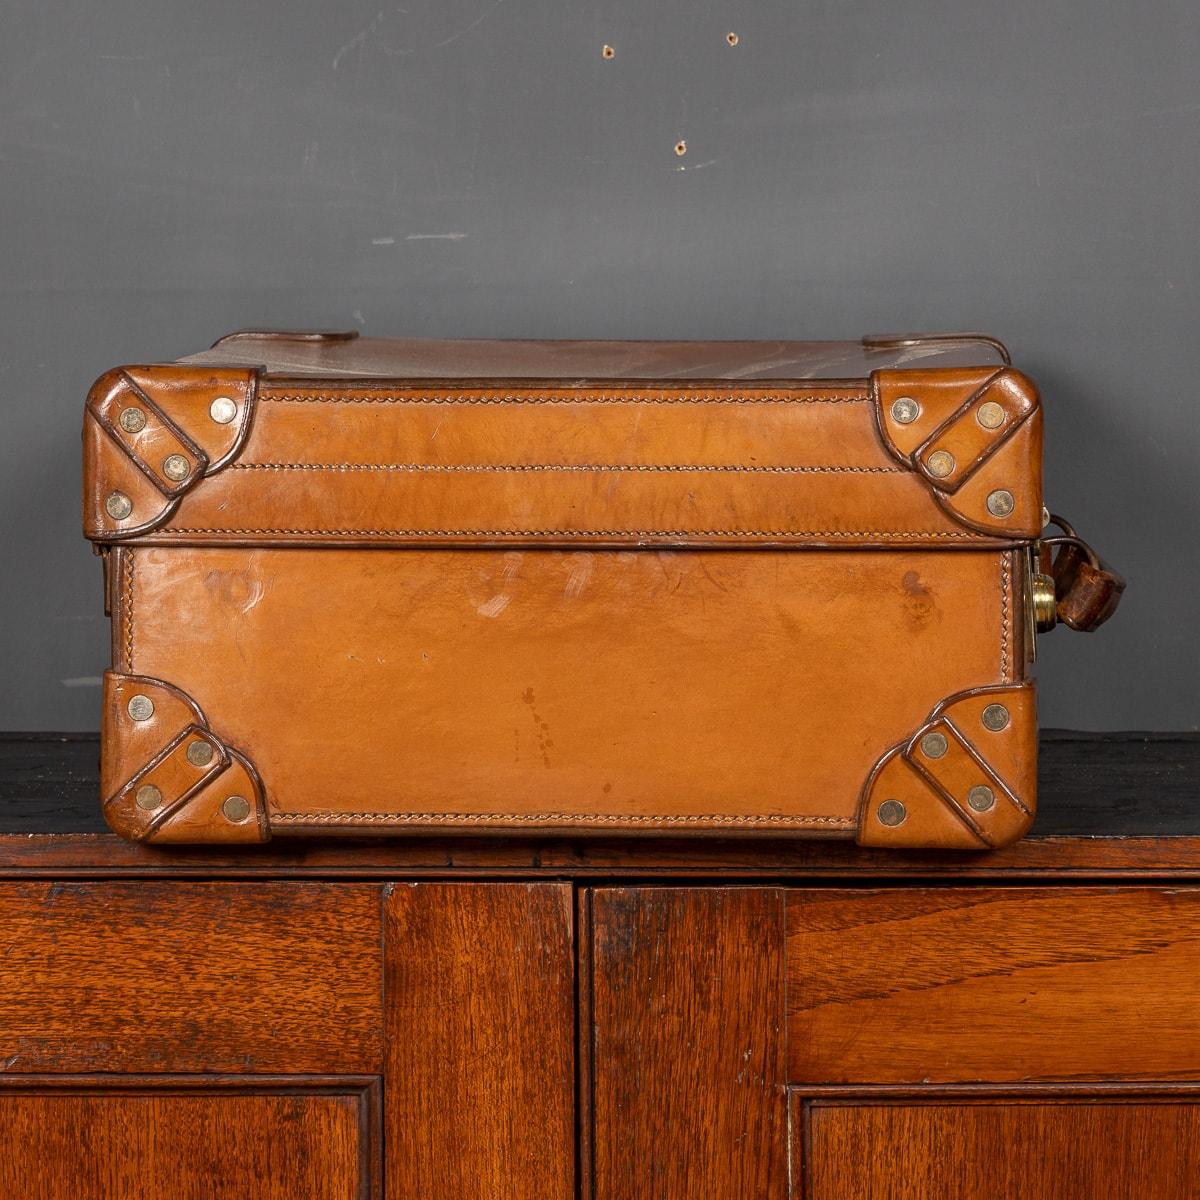 20th Century British Made Bridle Leather Suitcase, c.1910 For Sale 2